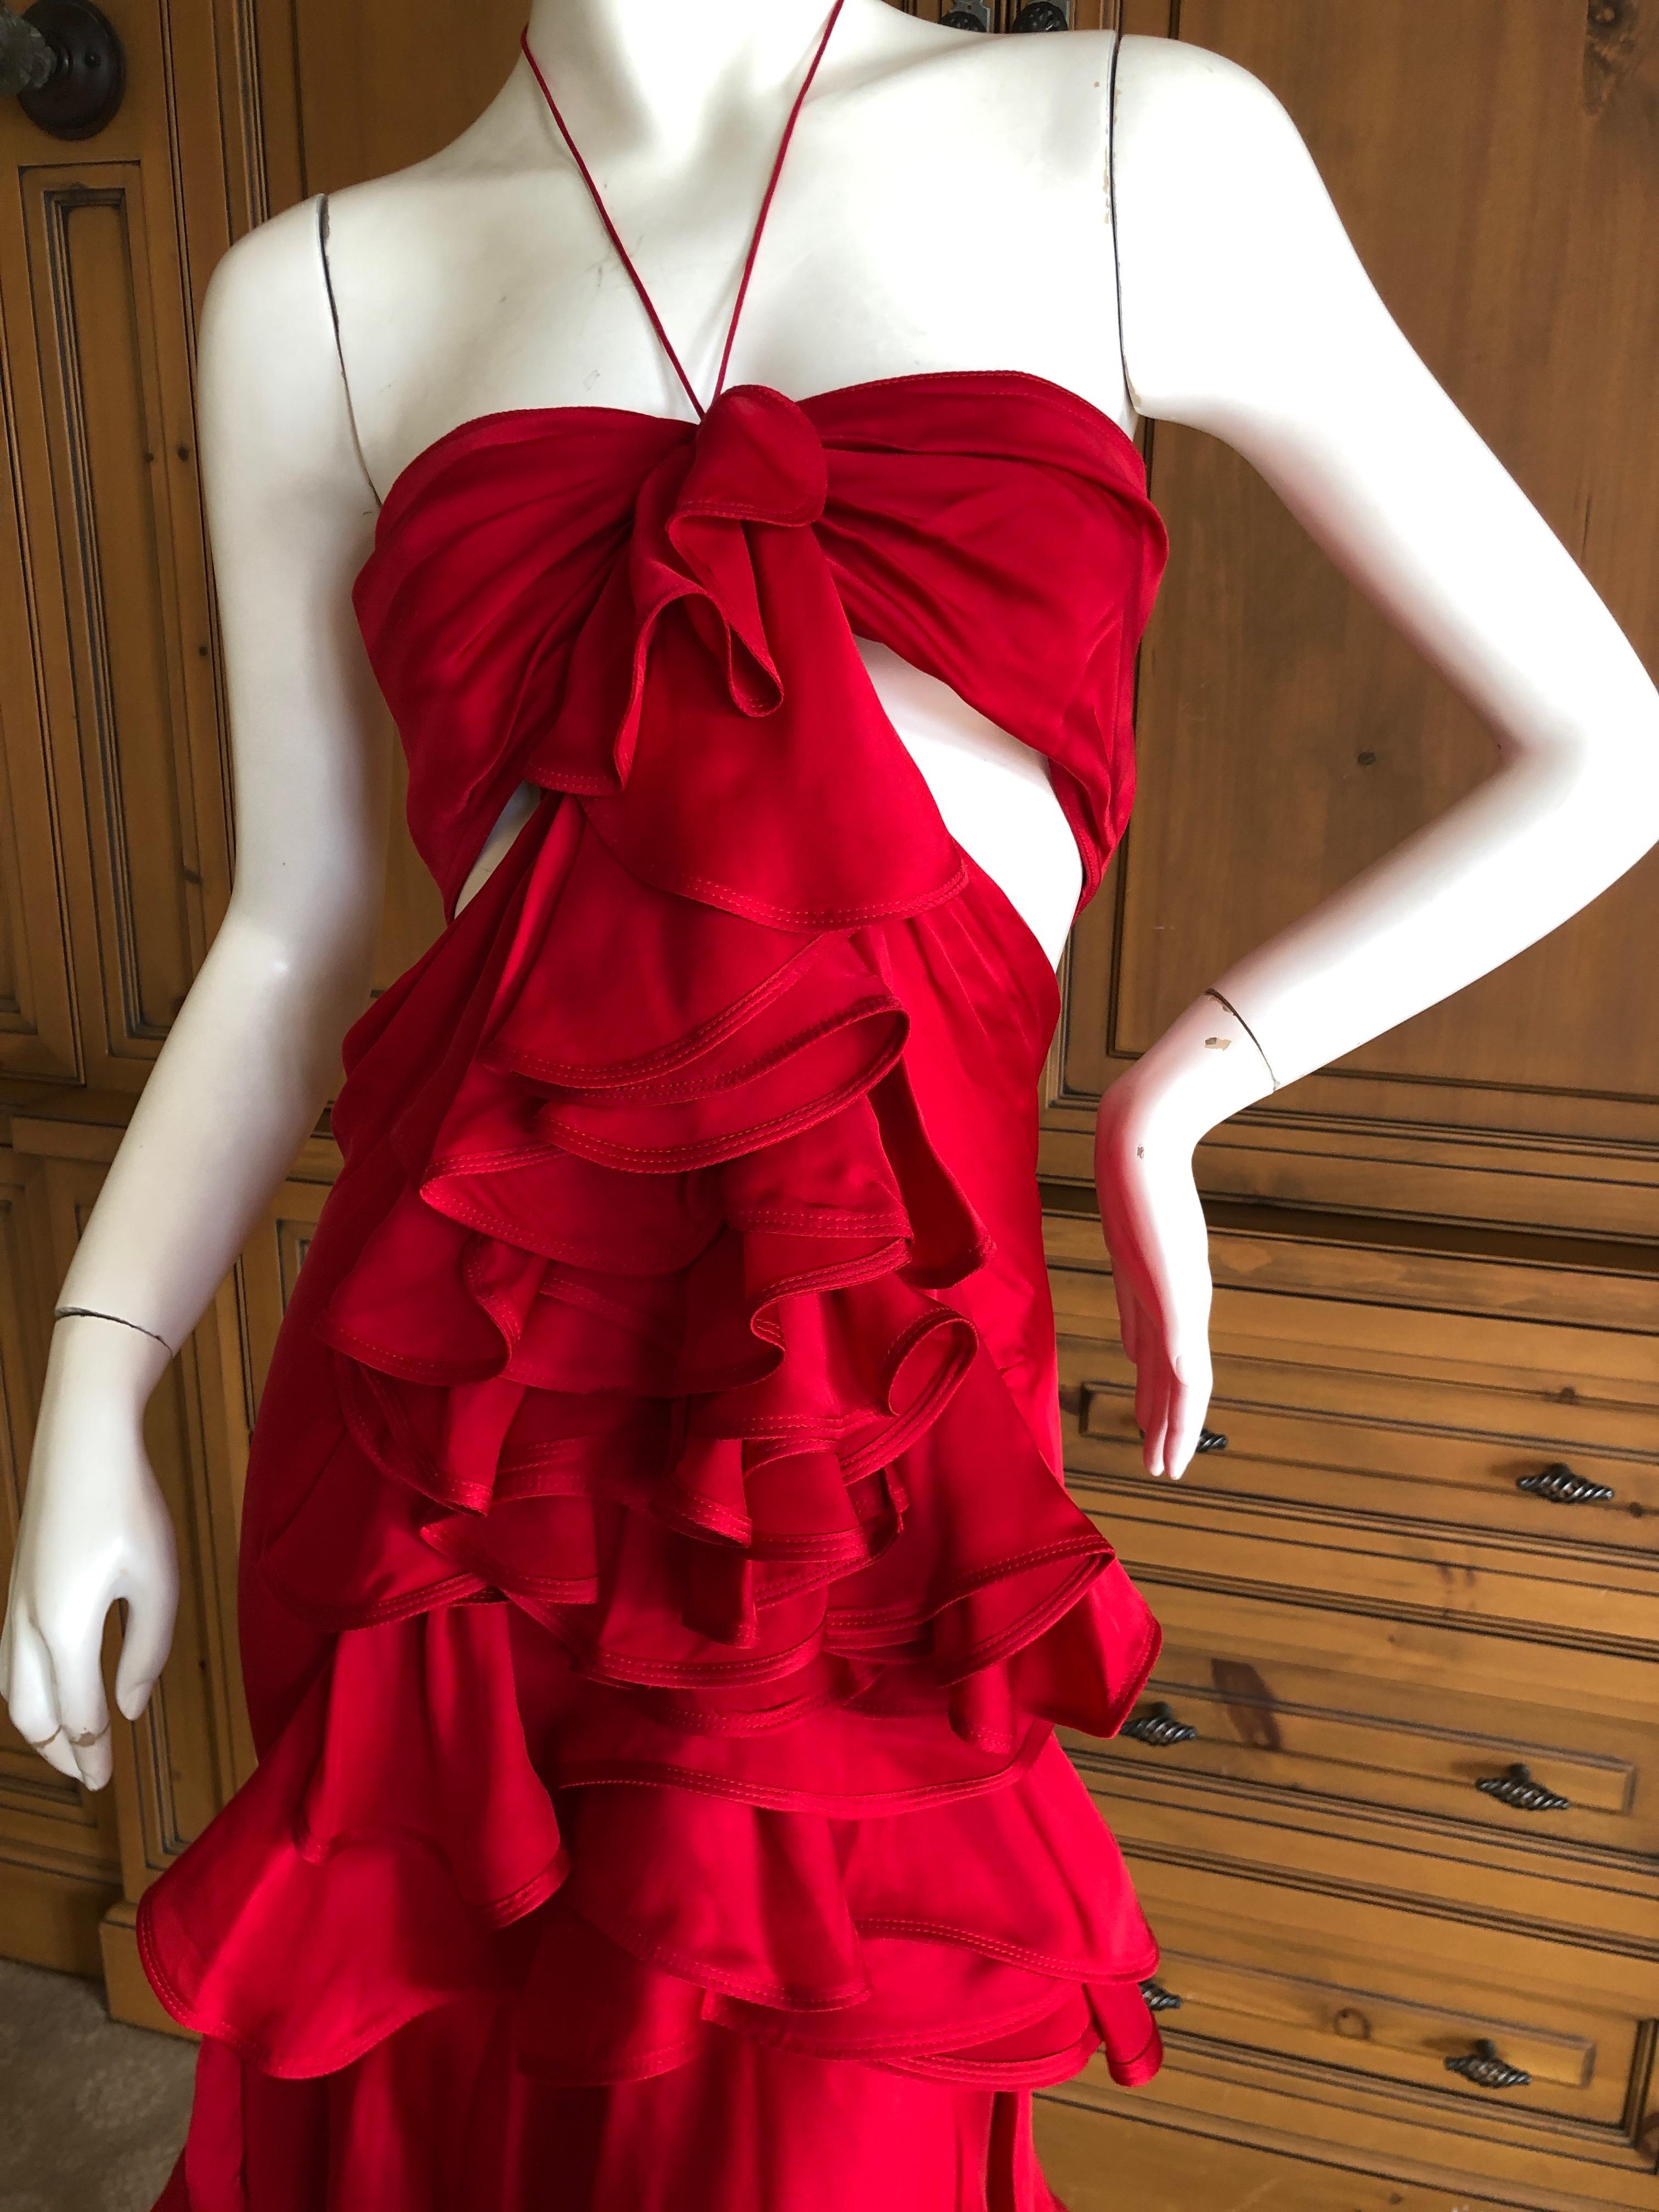 Yves Saint Laurent by Tom Ford 2003 Ruffled Red Silk Dress  For Sale 3